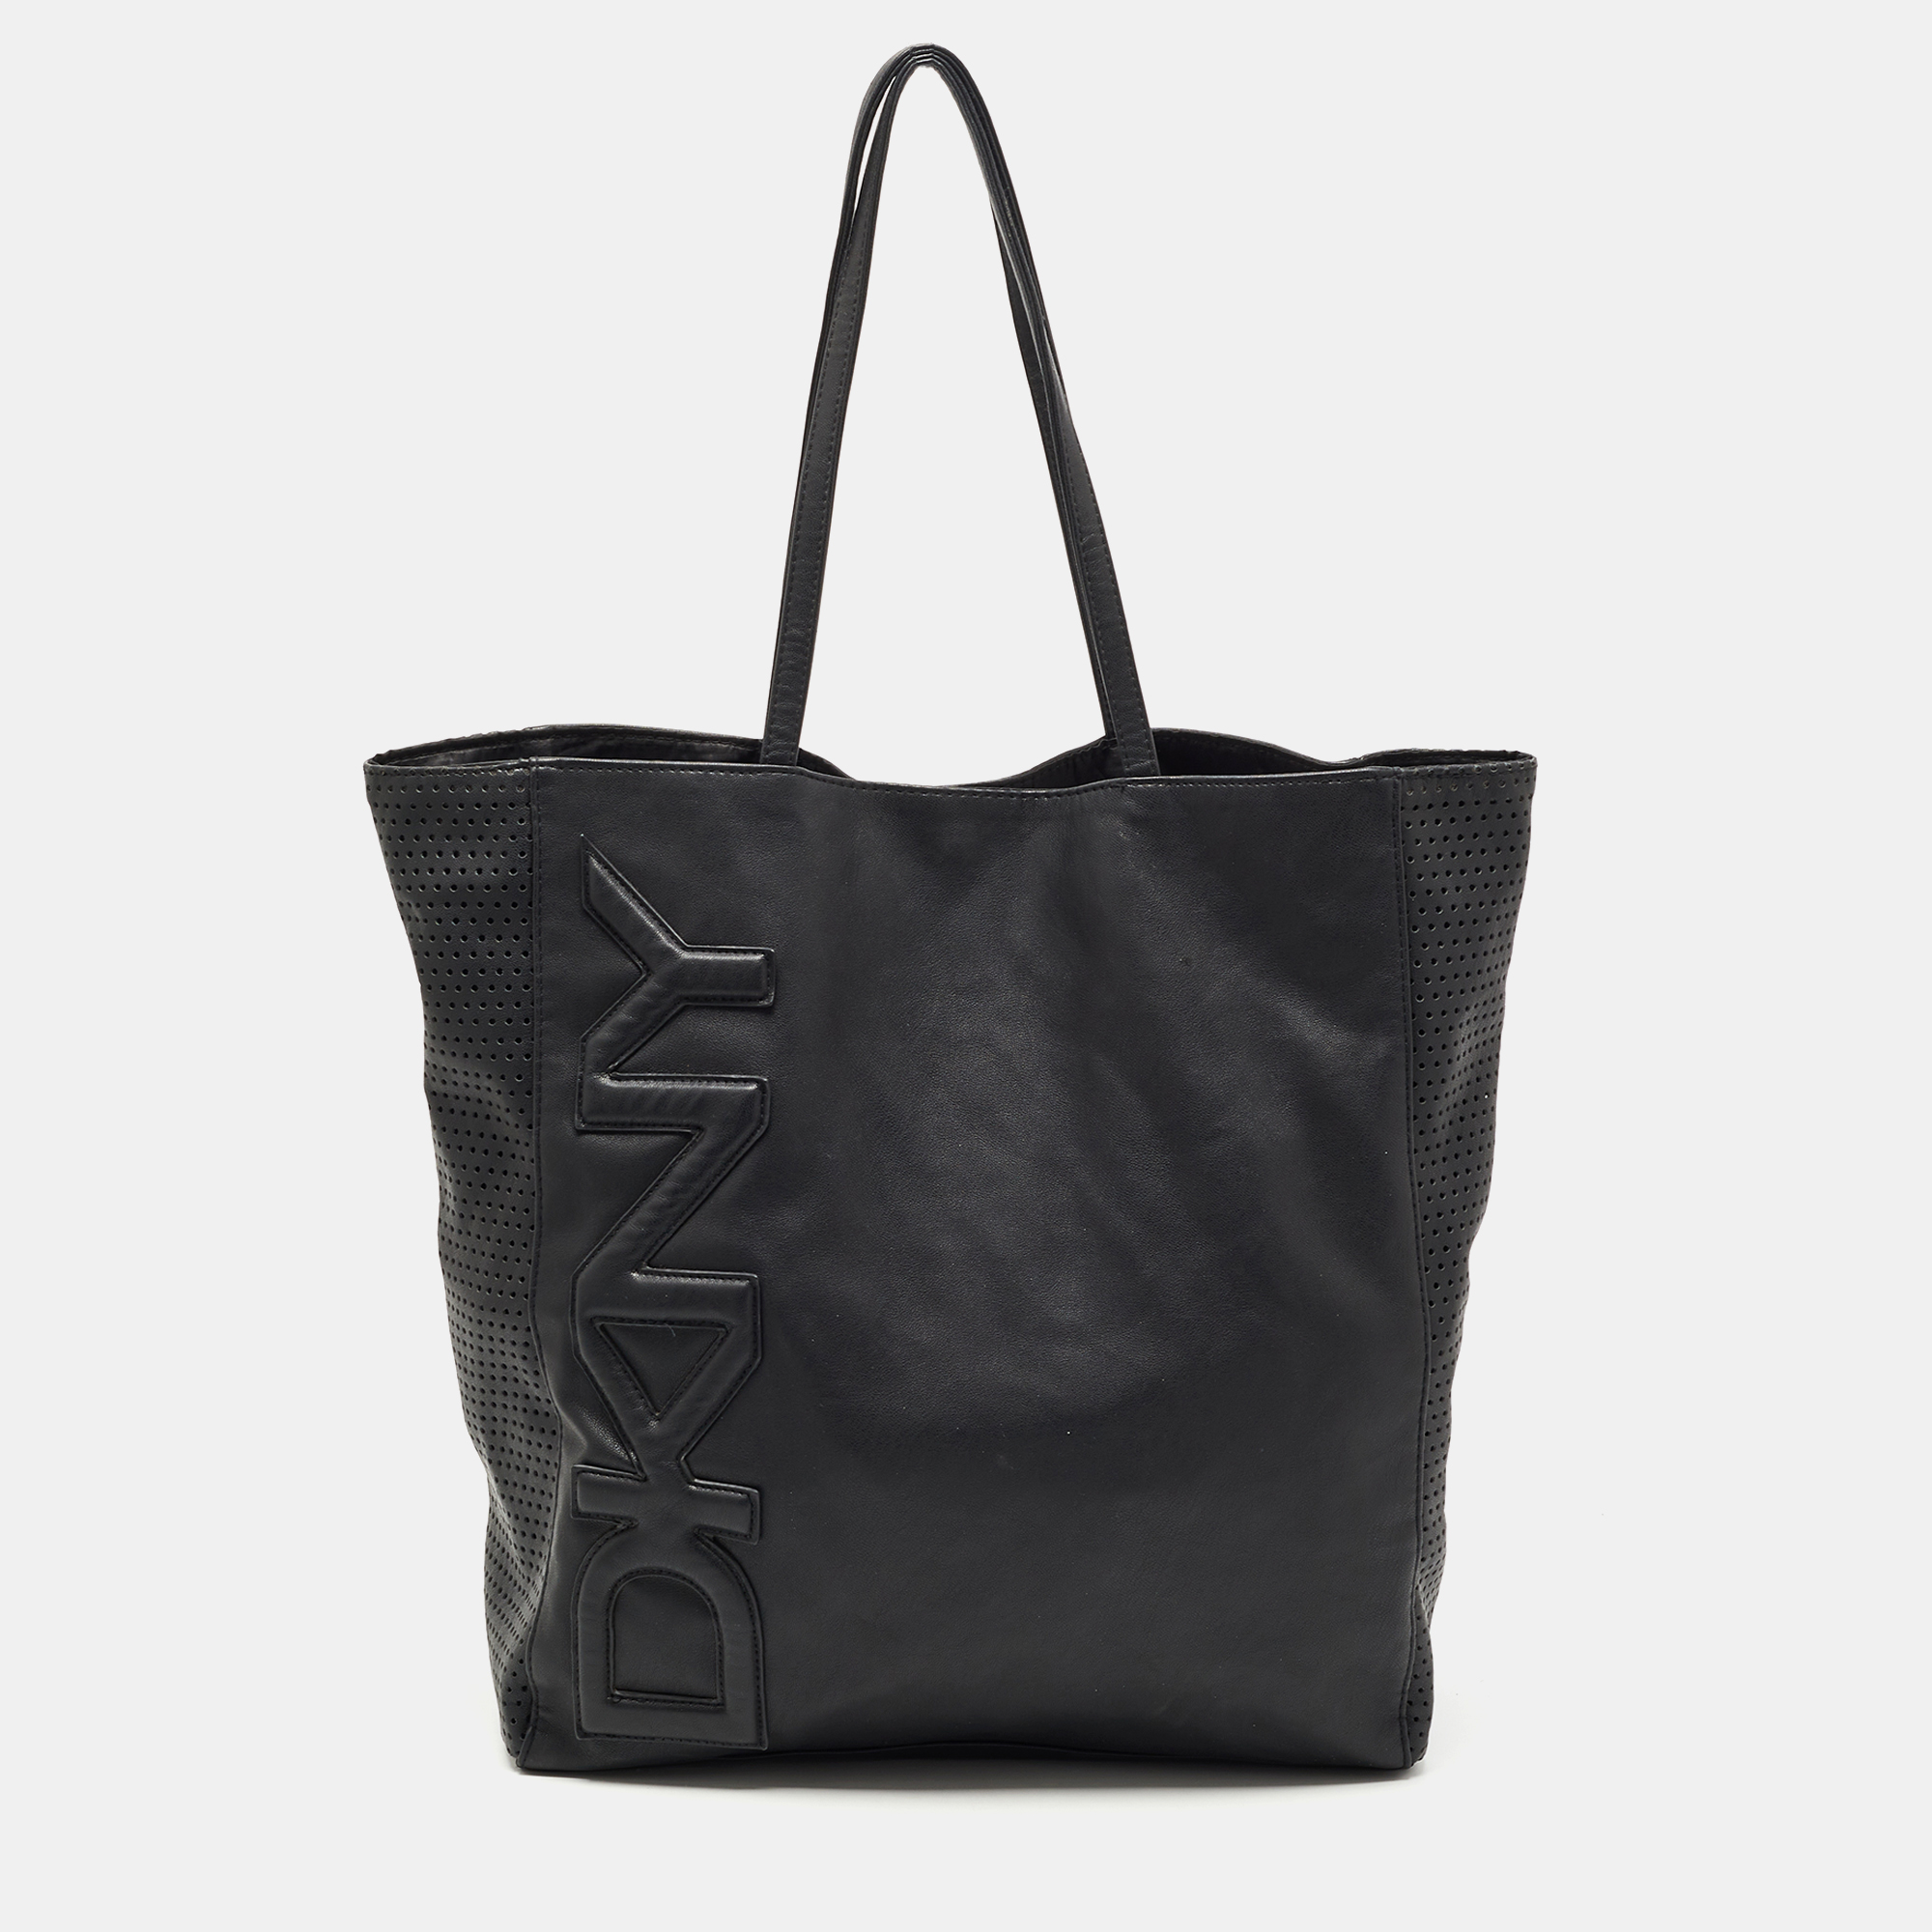 Pre-owned Dkny Black Perforated Leather Shopper Tote